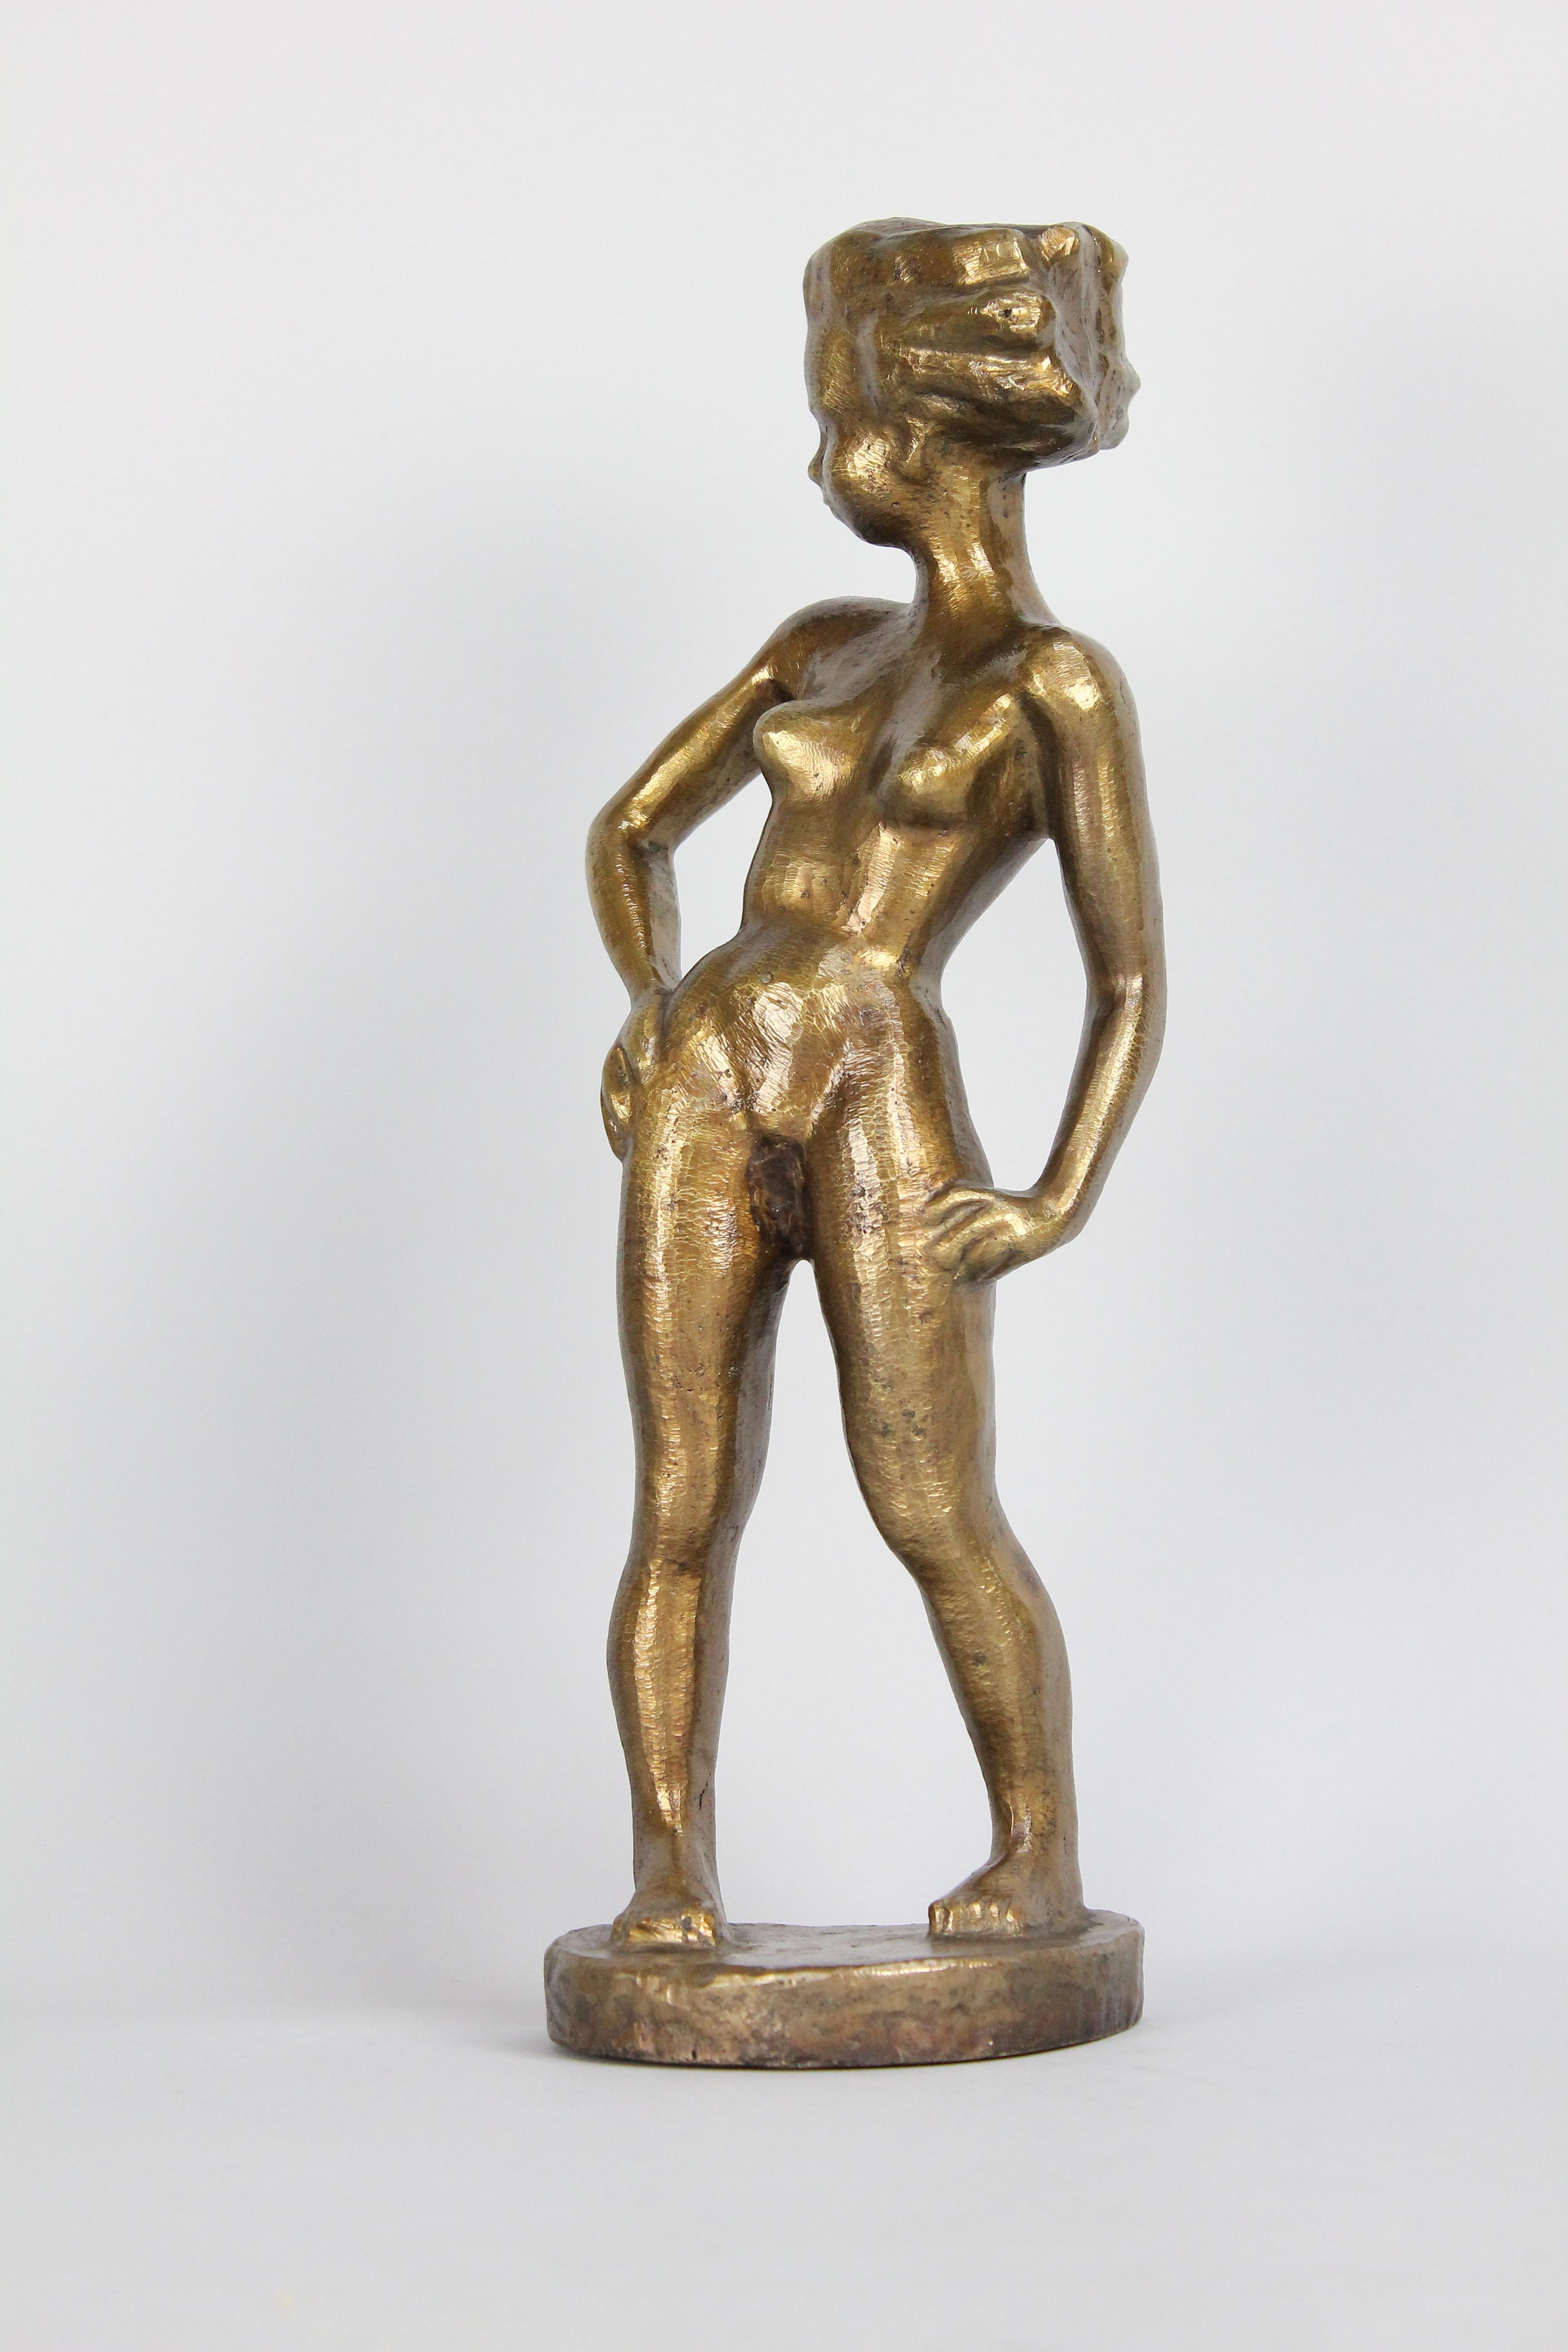 A young woman with an attitude! That pose says it all!

Cast in golden bronze and signed 